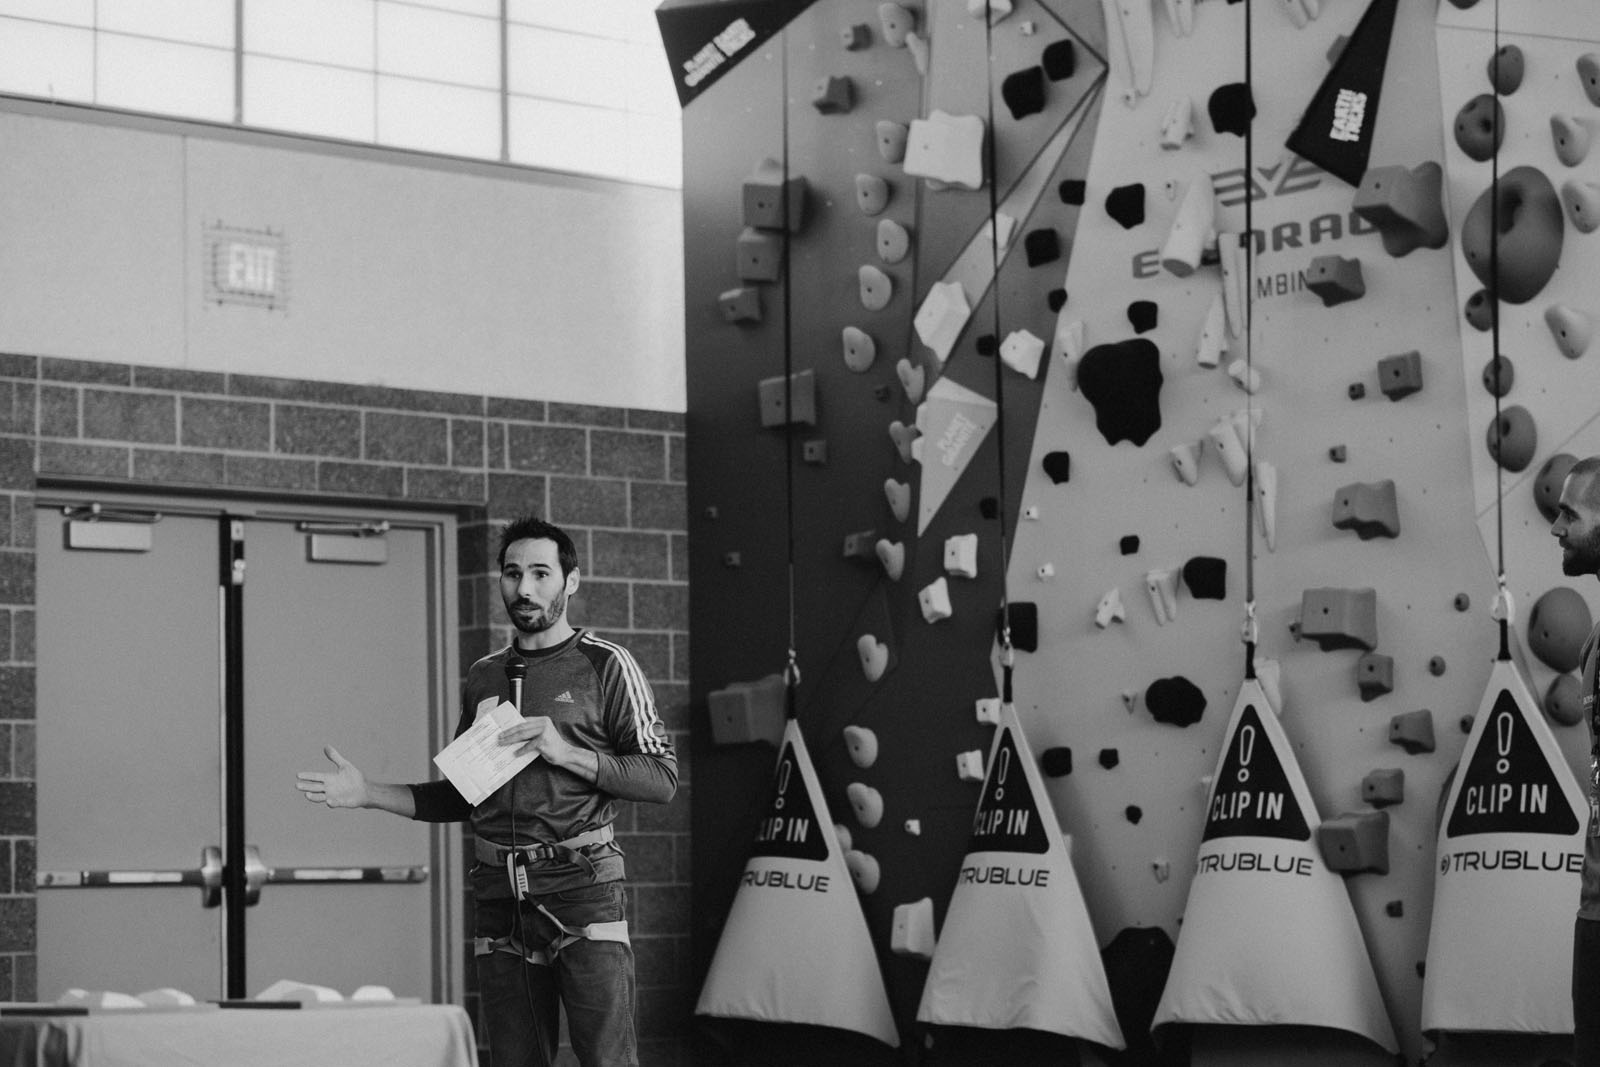 Climber and 1Climb cofounder Kevin Jorgeson stands in front of the new 1Climb wall in Denver